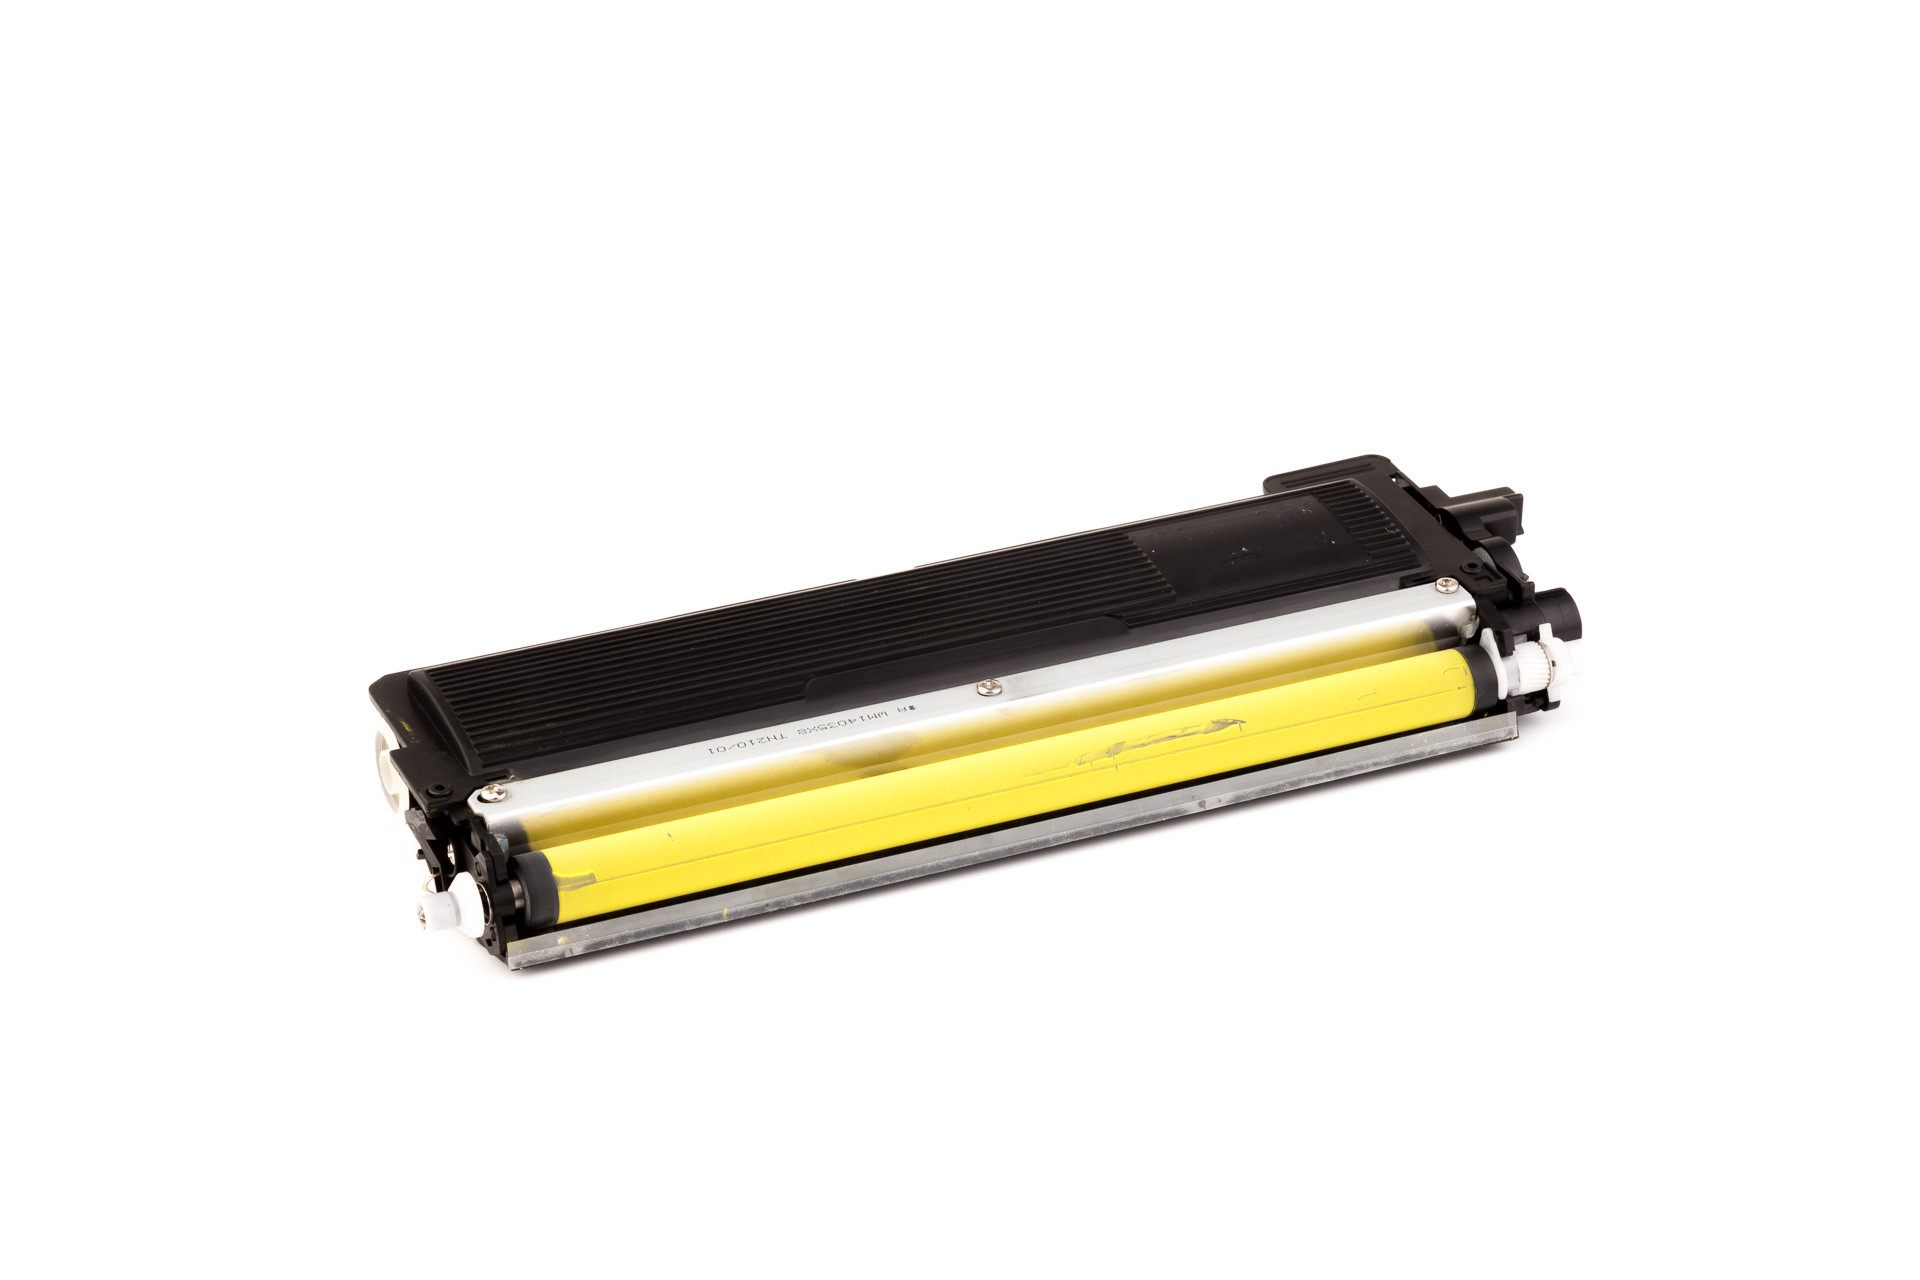 Toner cartridge (alternative) compatible with Brother HL 3040/3070/DCP 9010/MFC 9120/9320 yellow  TN230Y / TN 230 Y